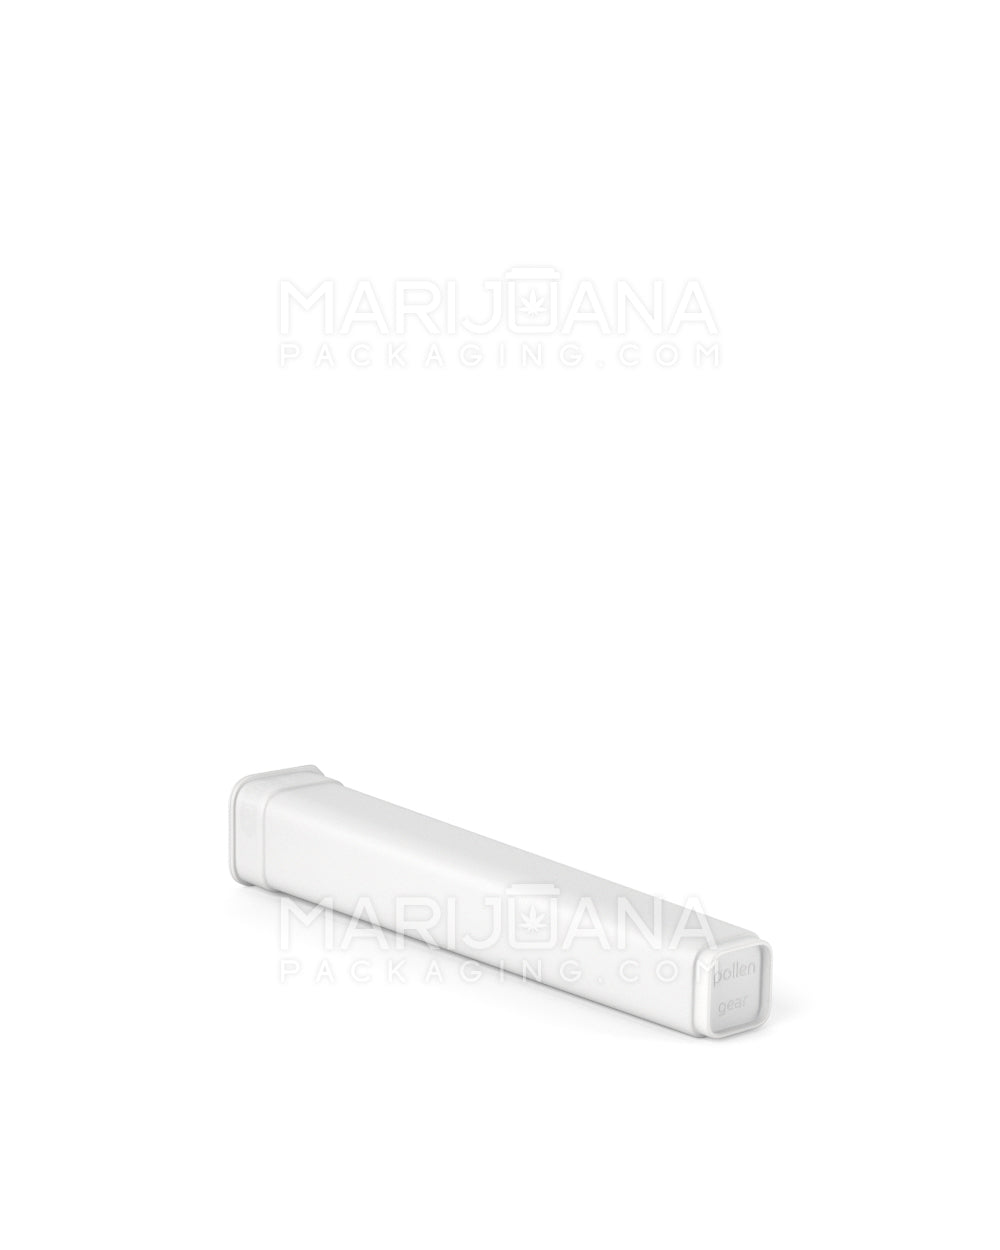 POLLEN GEAR | 100% Recyclable Opaque Pop Box Pop Top Plastic Pre-Roll Tubes | 119mm - White - 1840 Count - 7